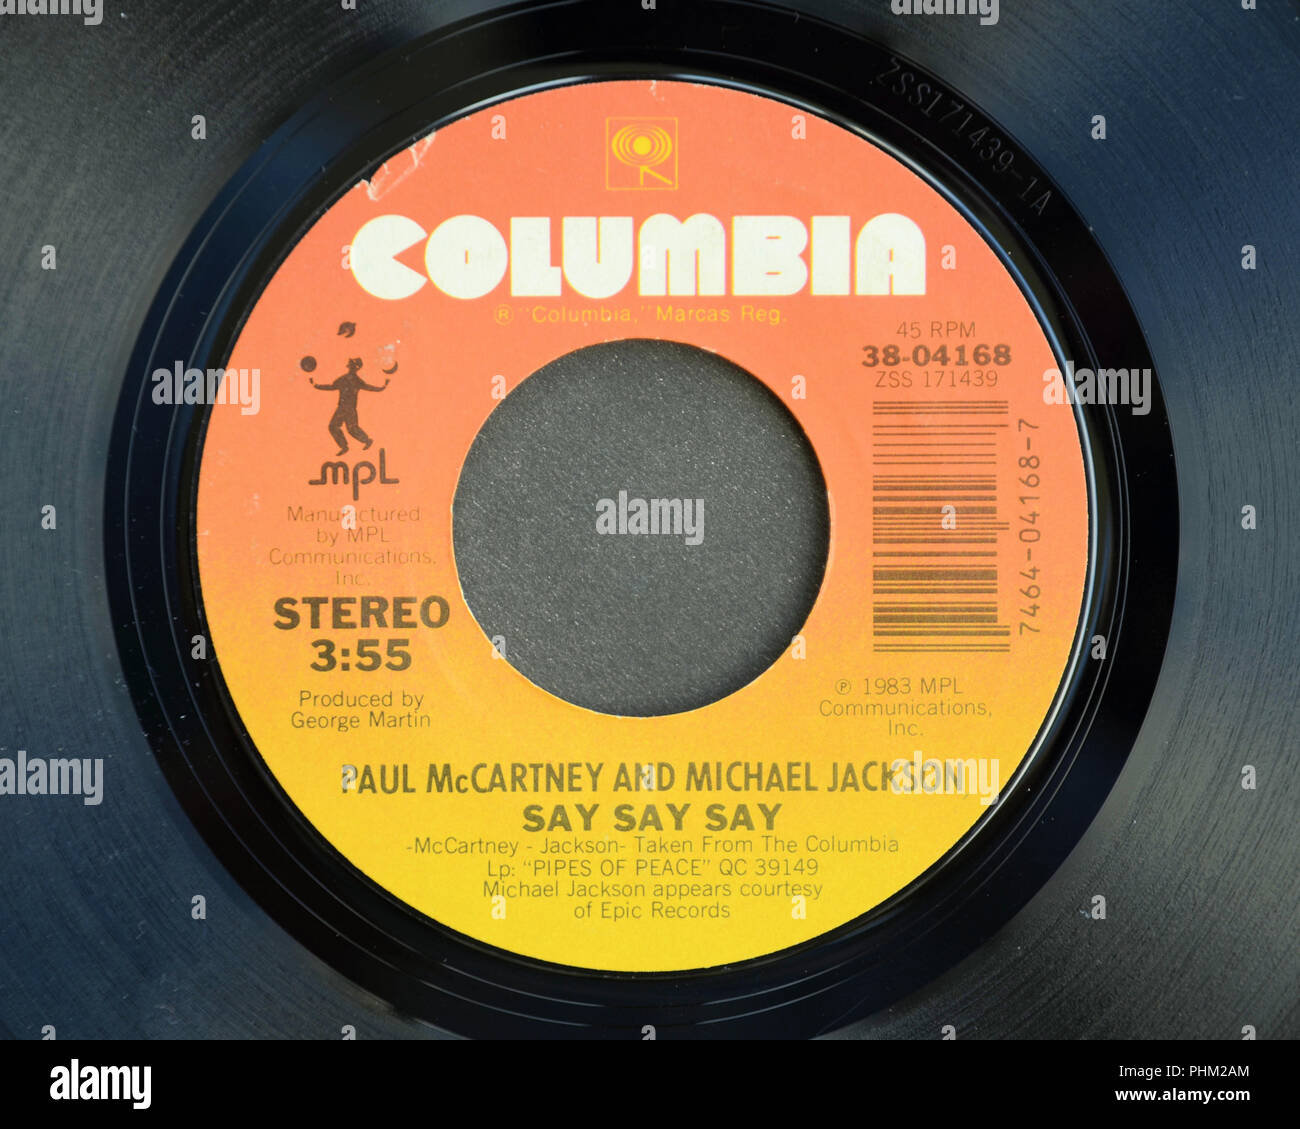 Close-up of the 45 RPM vinyl record of Paul McCartney and Michael Jackson's  song "Say Say Say" released in 1983 by Columbia Records Stock Photo - Alamy